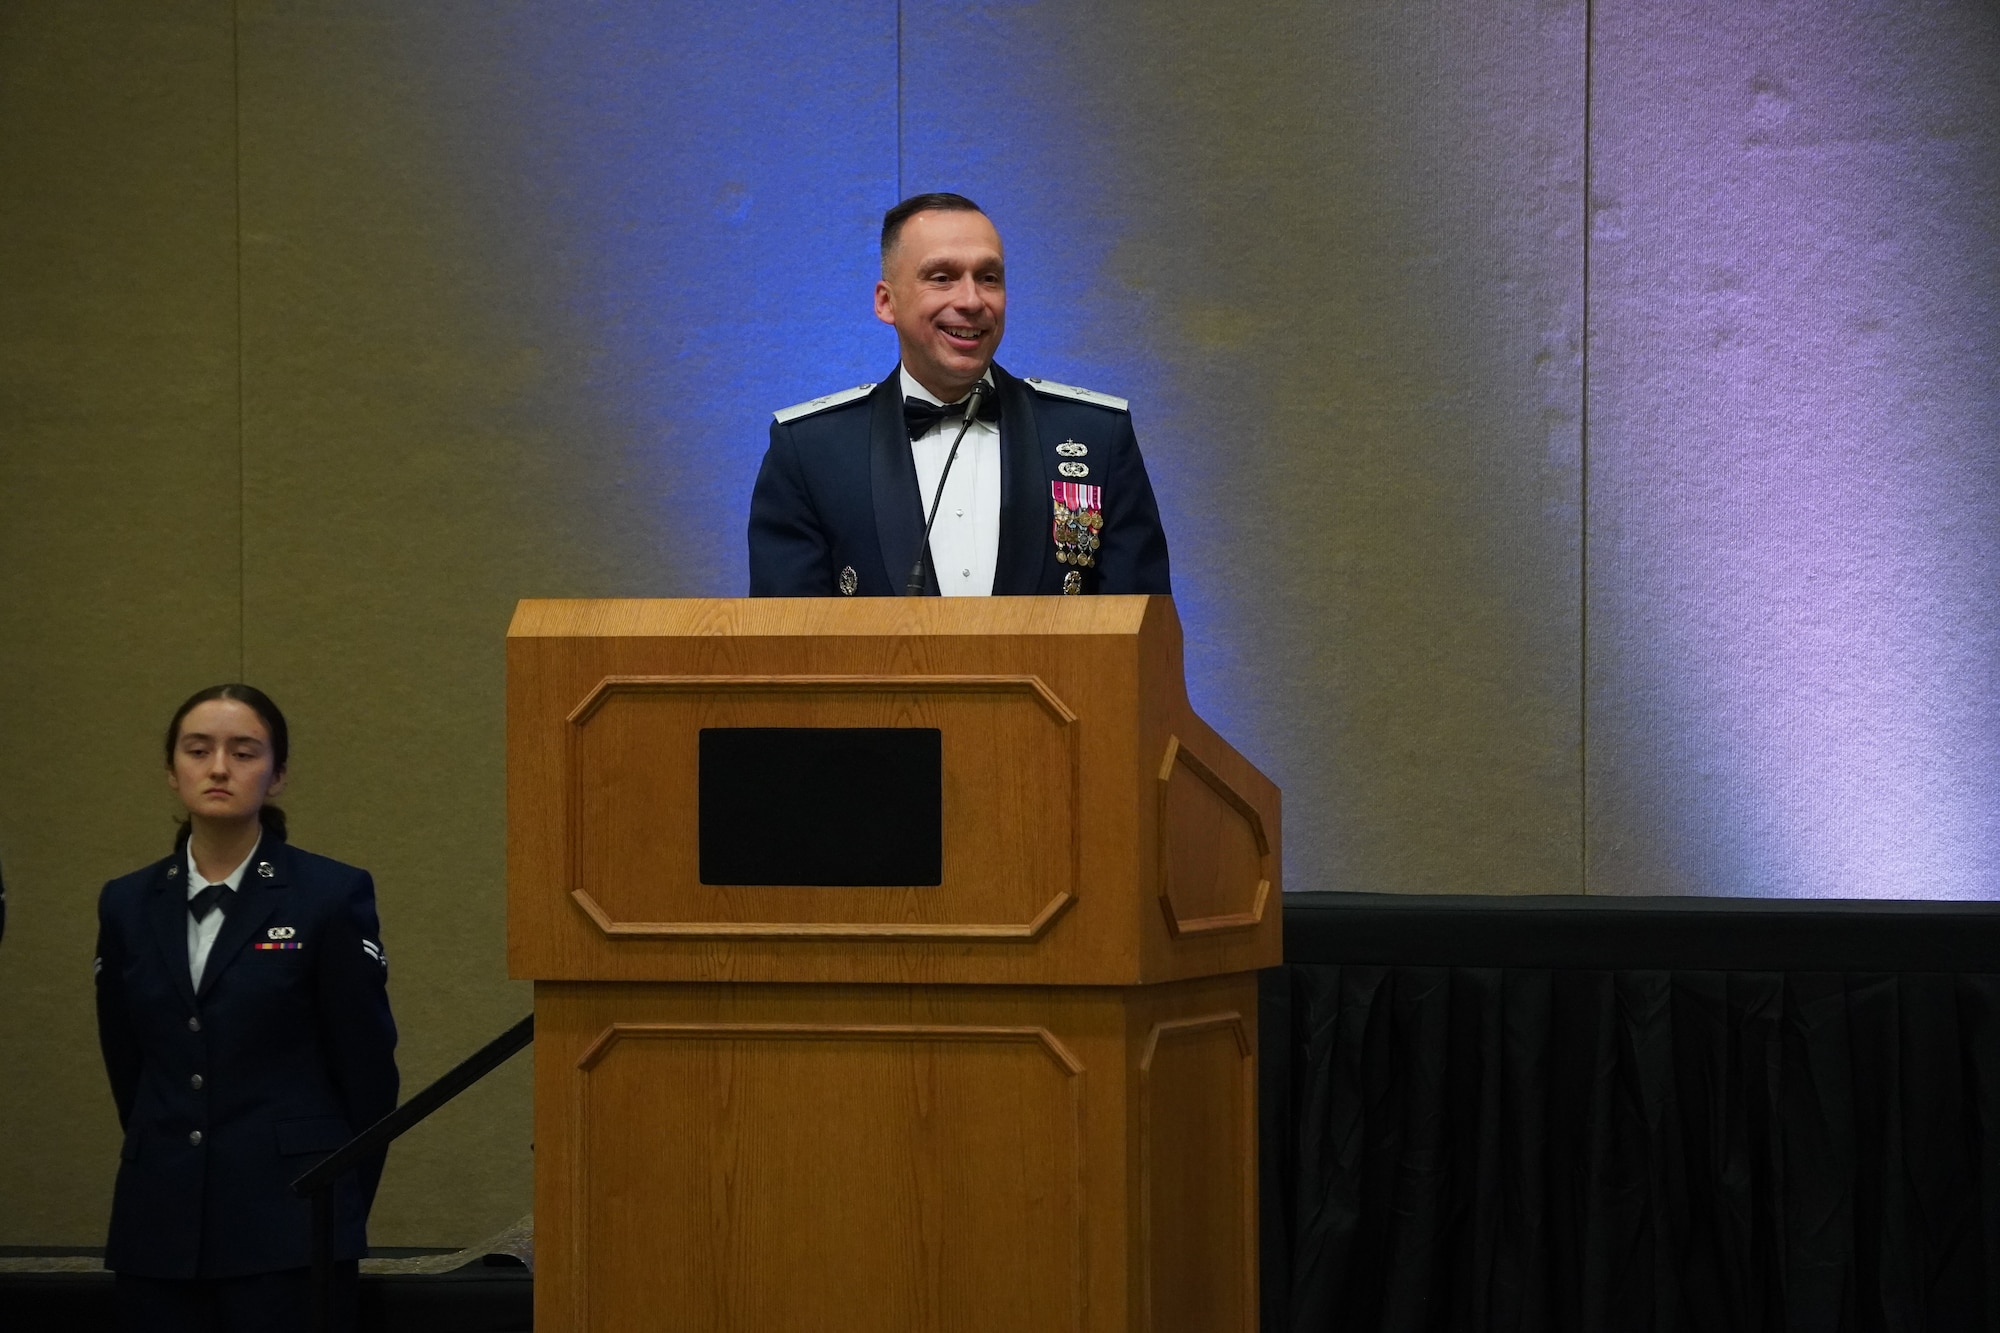 Brig. Gen. Lyle Drew, 82nd Training Wing Commander, provided closing remarks to the 2022 Annual Awards ceremony Feb. 3, 2023.